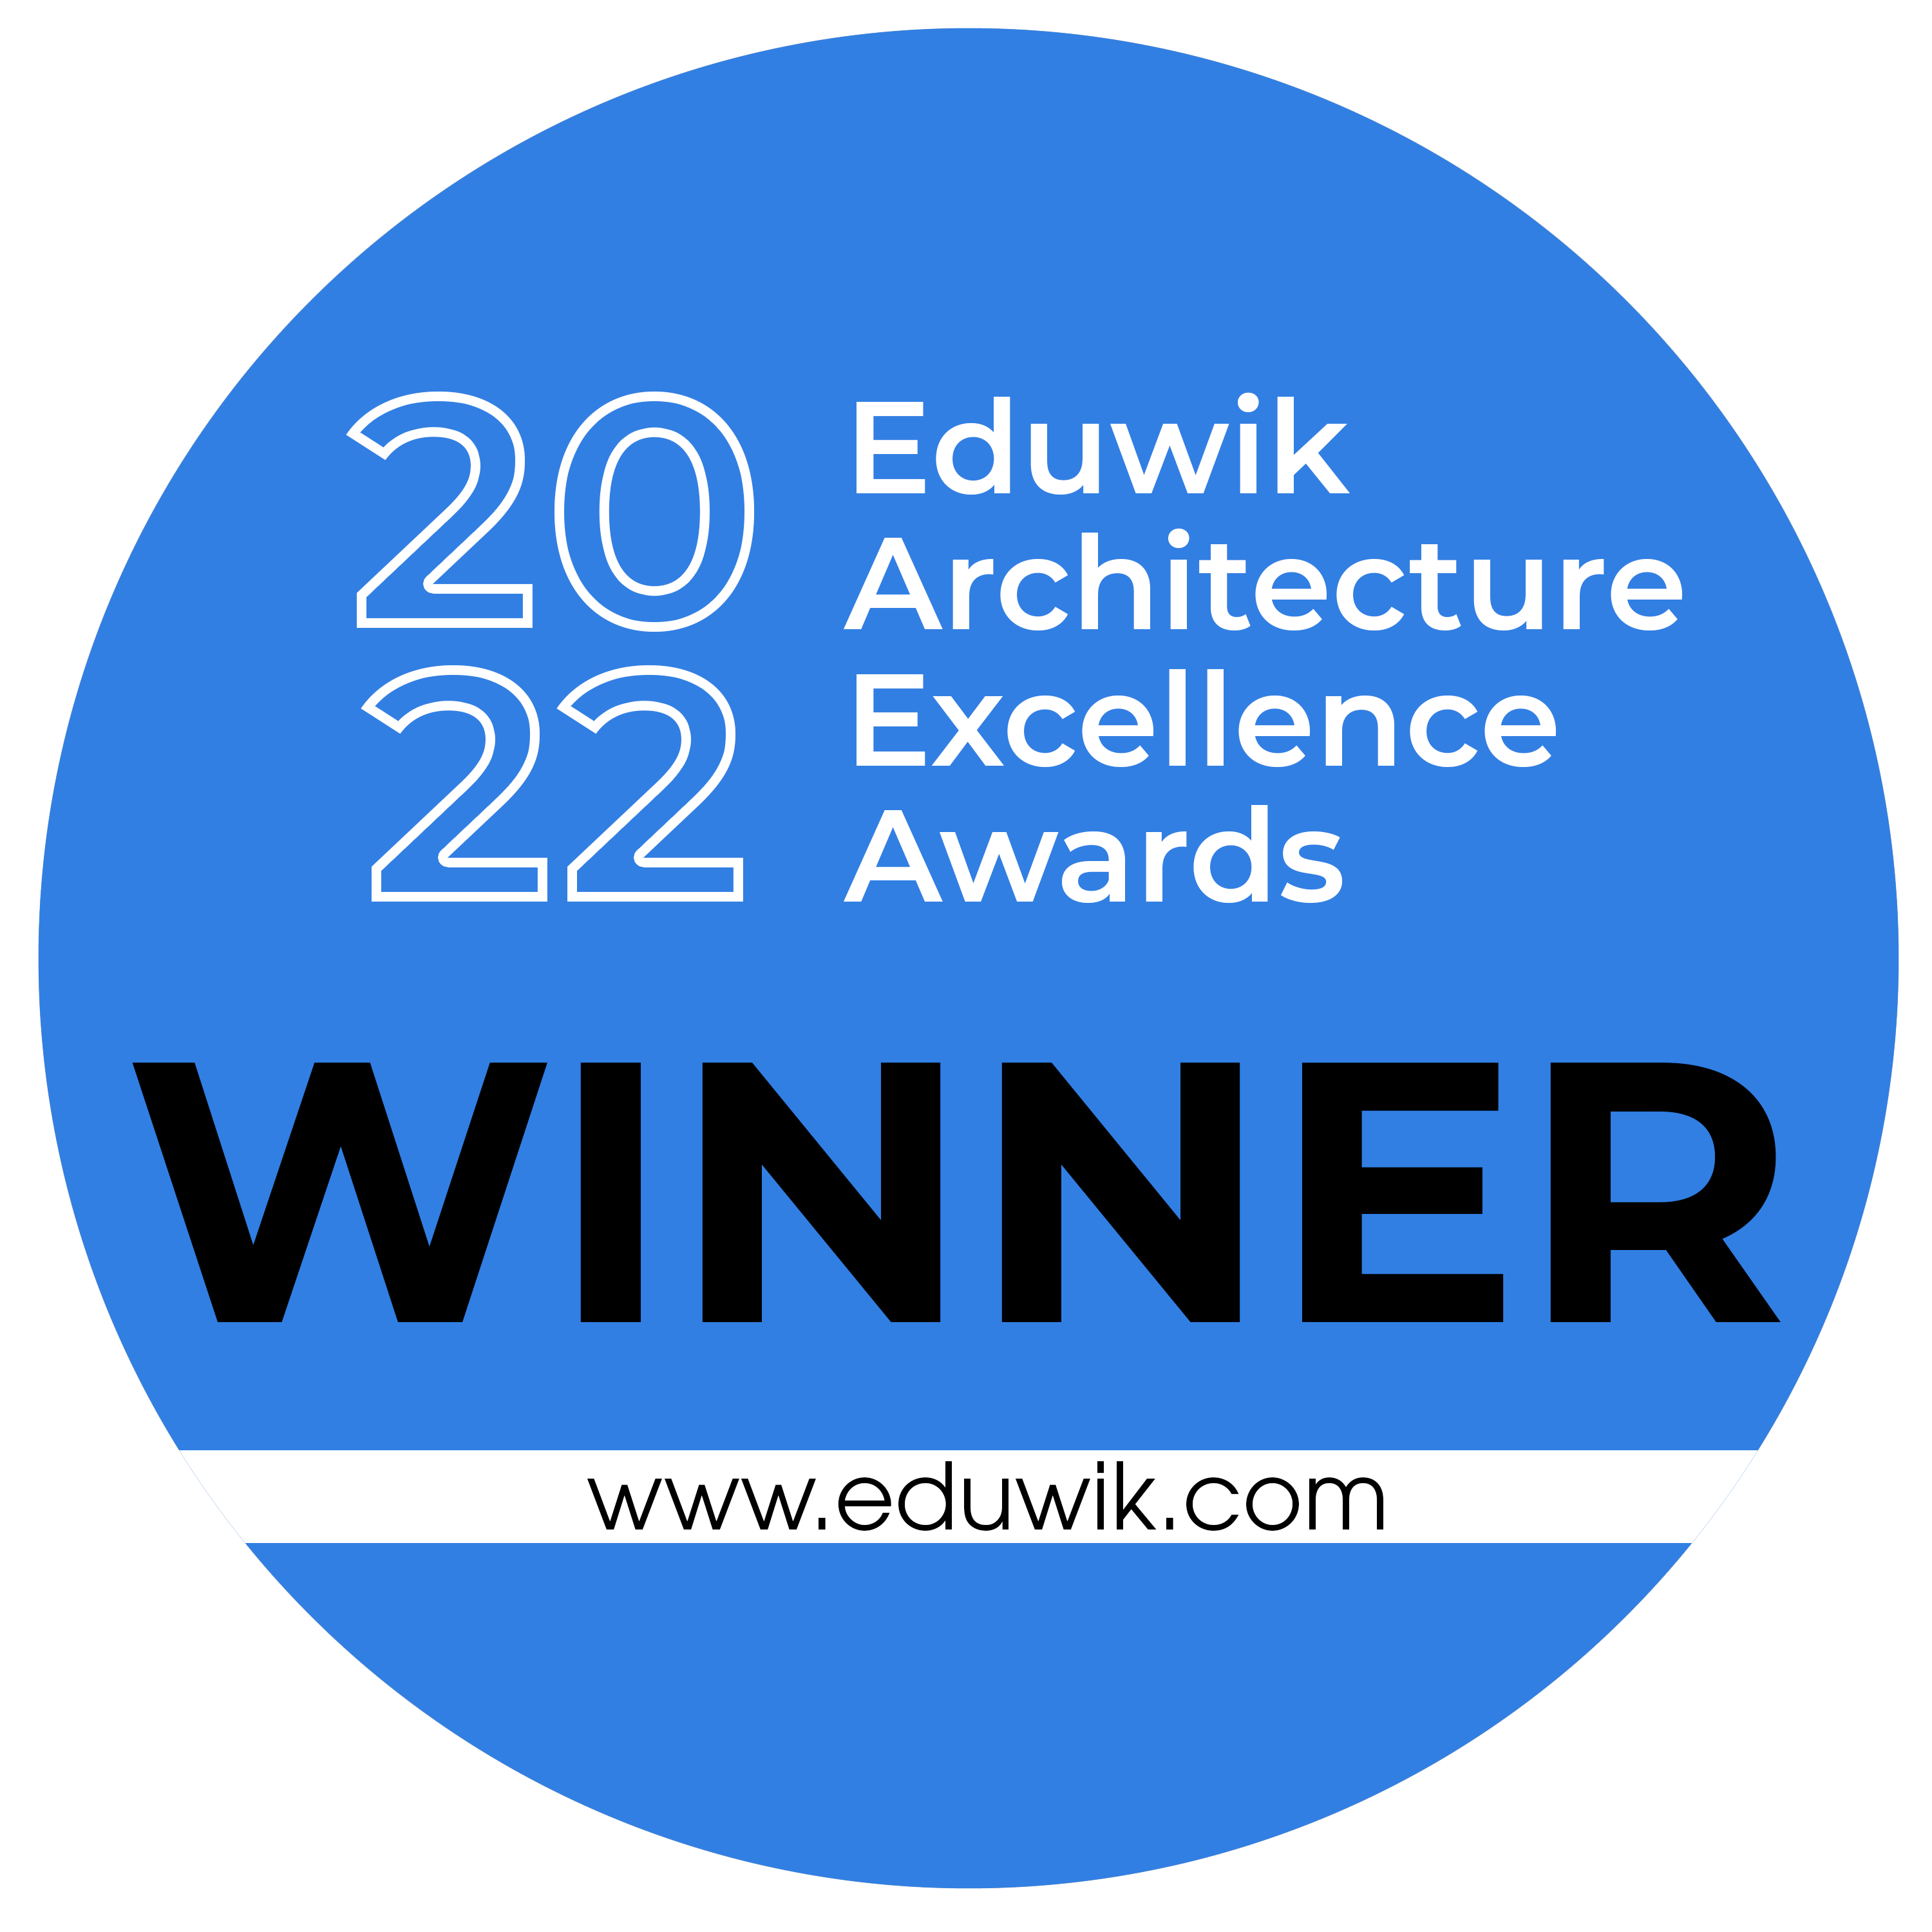 Winners Logo - Eduwik Architecture Excellence Awards 2022